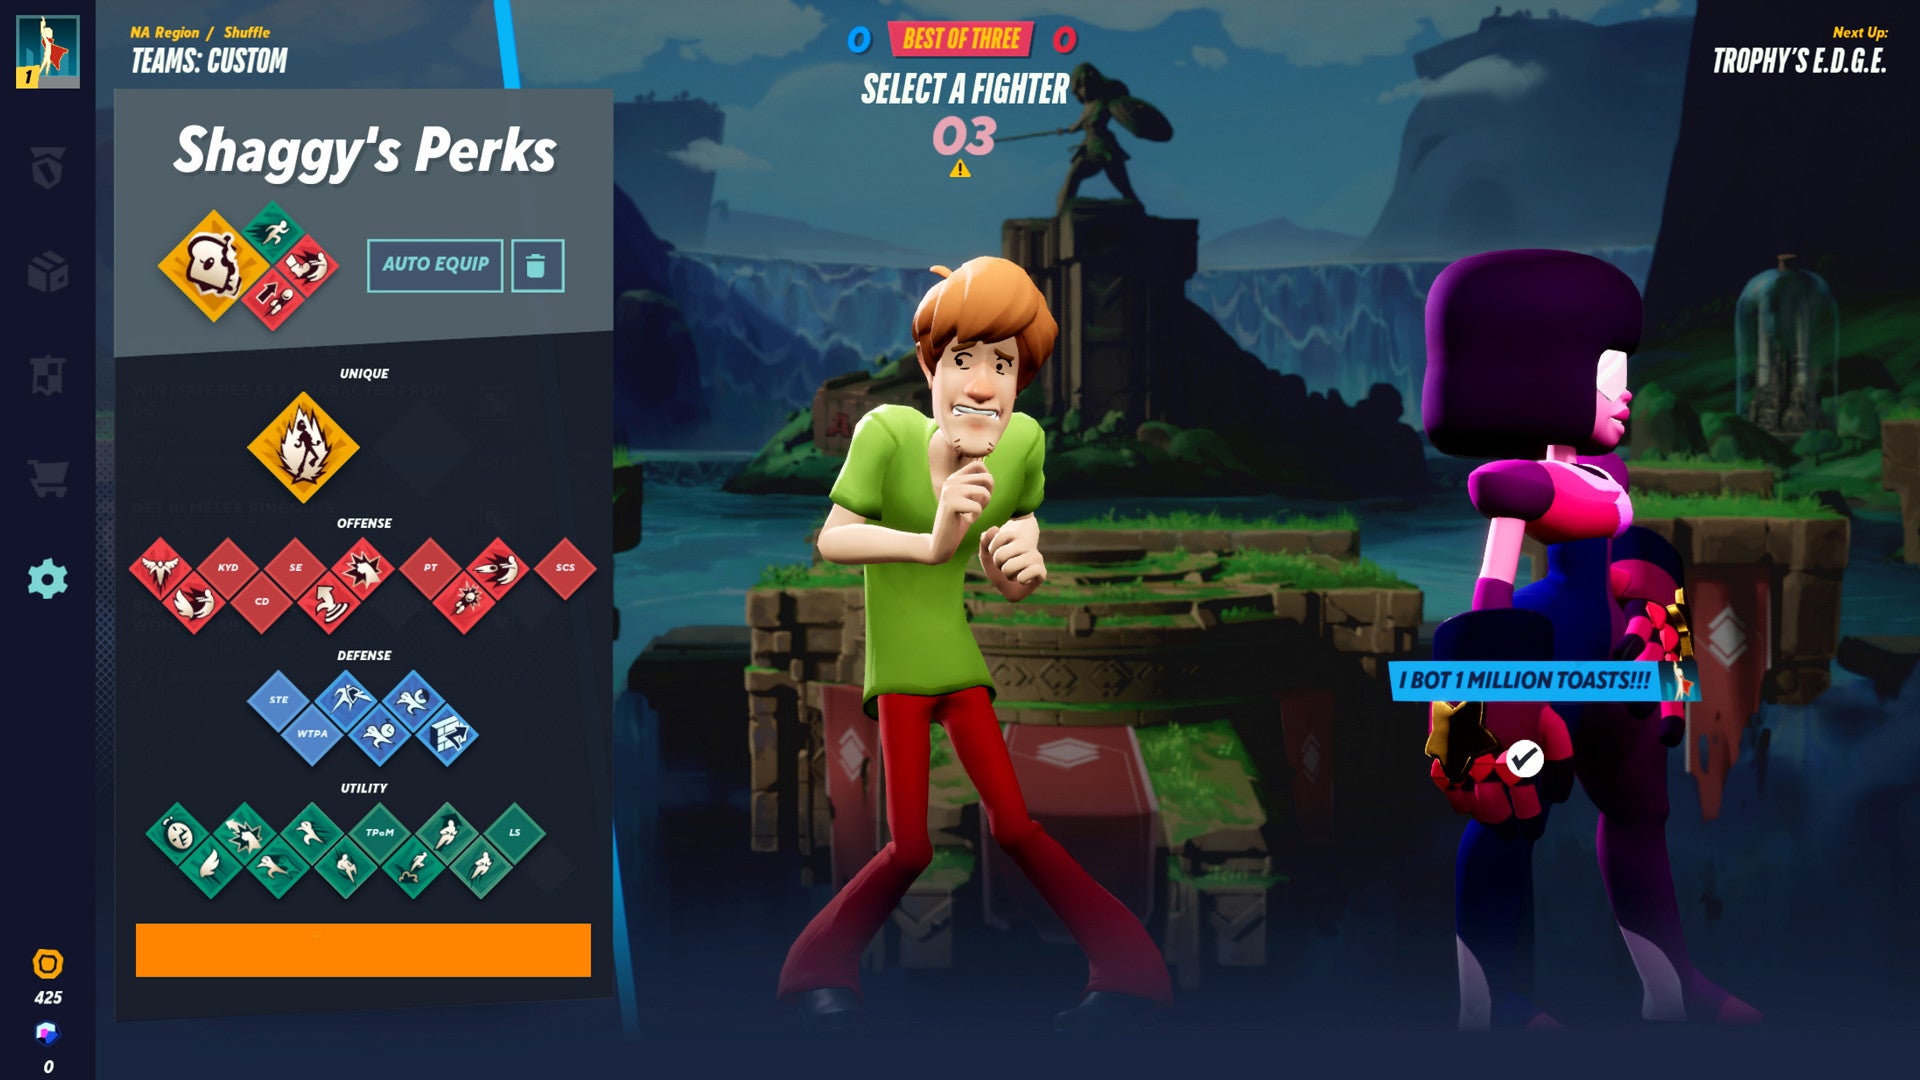 A look at Shaggy's perks in MultiVersus.